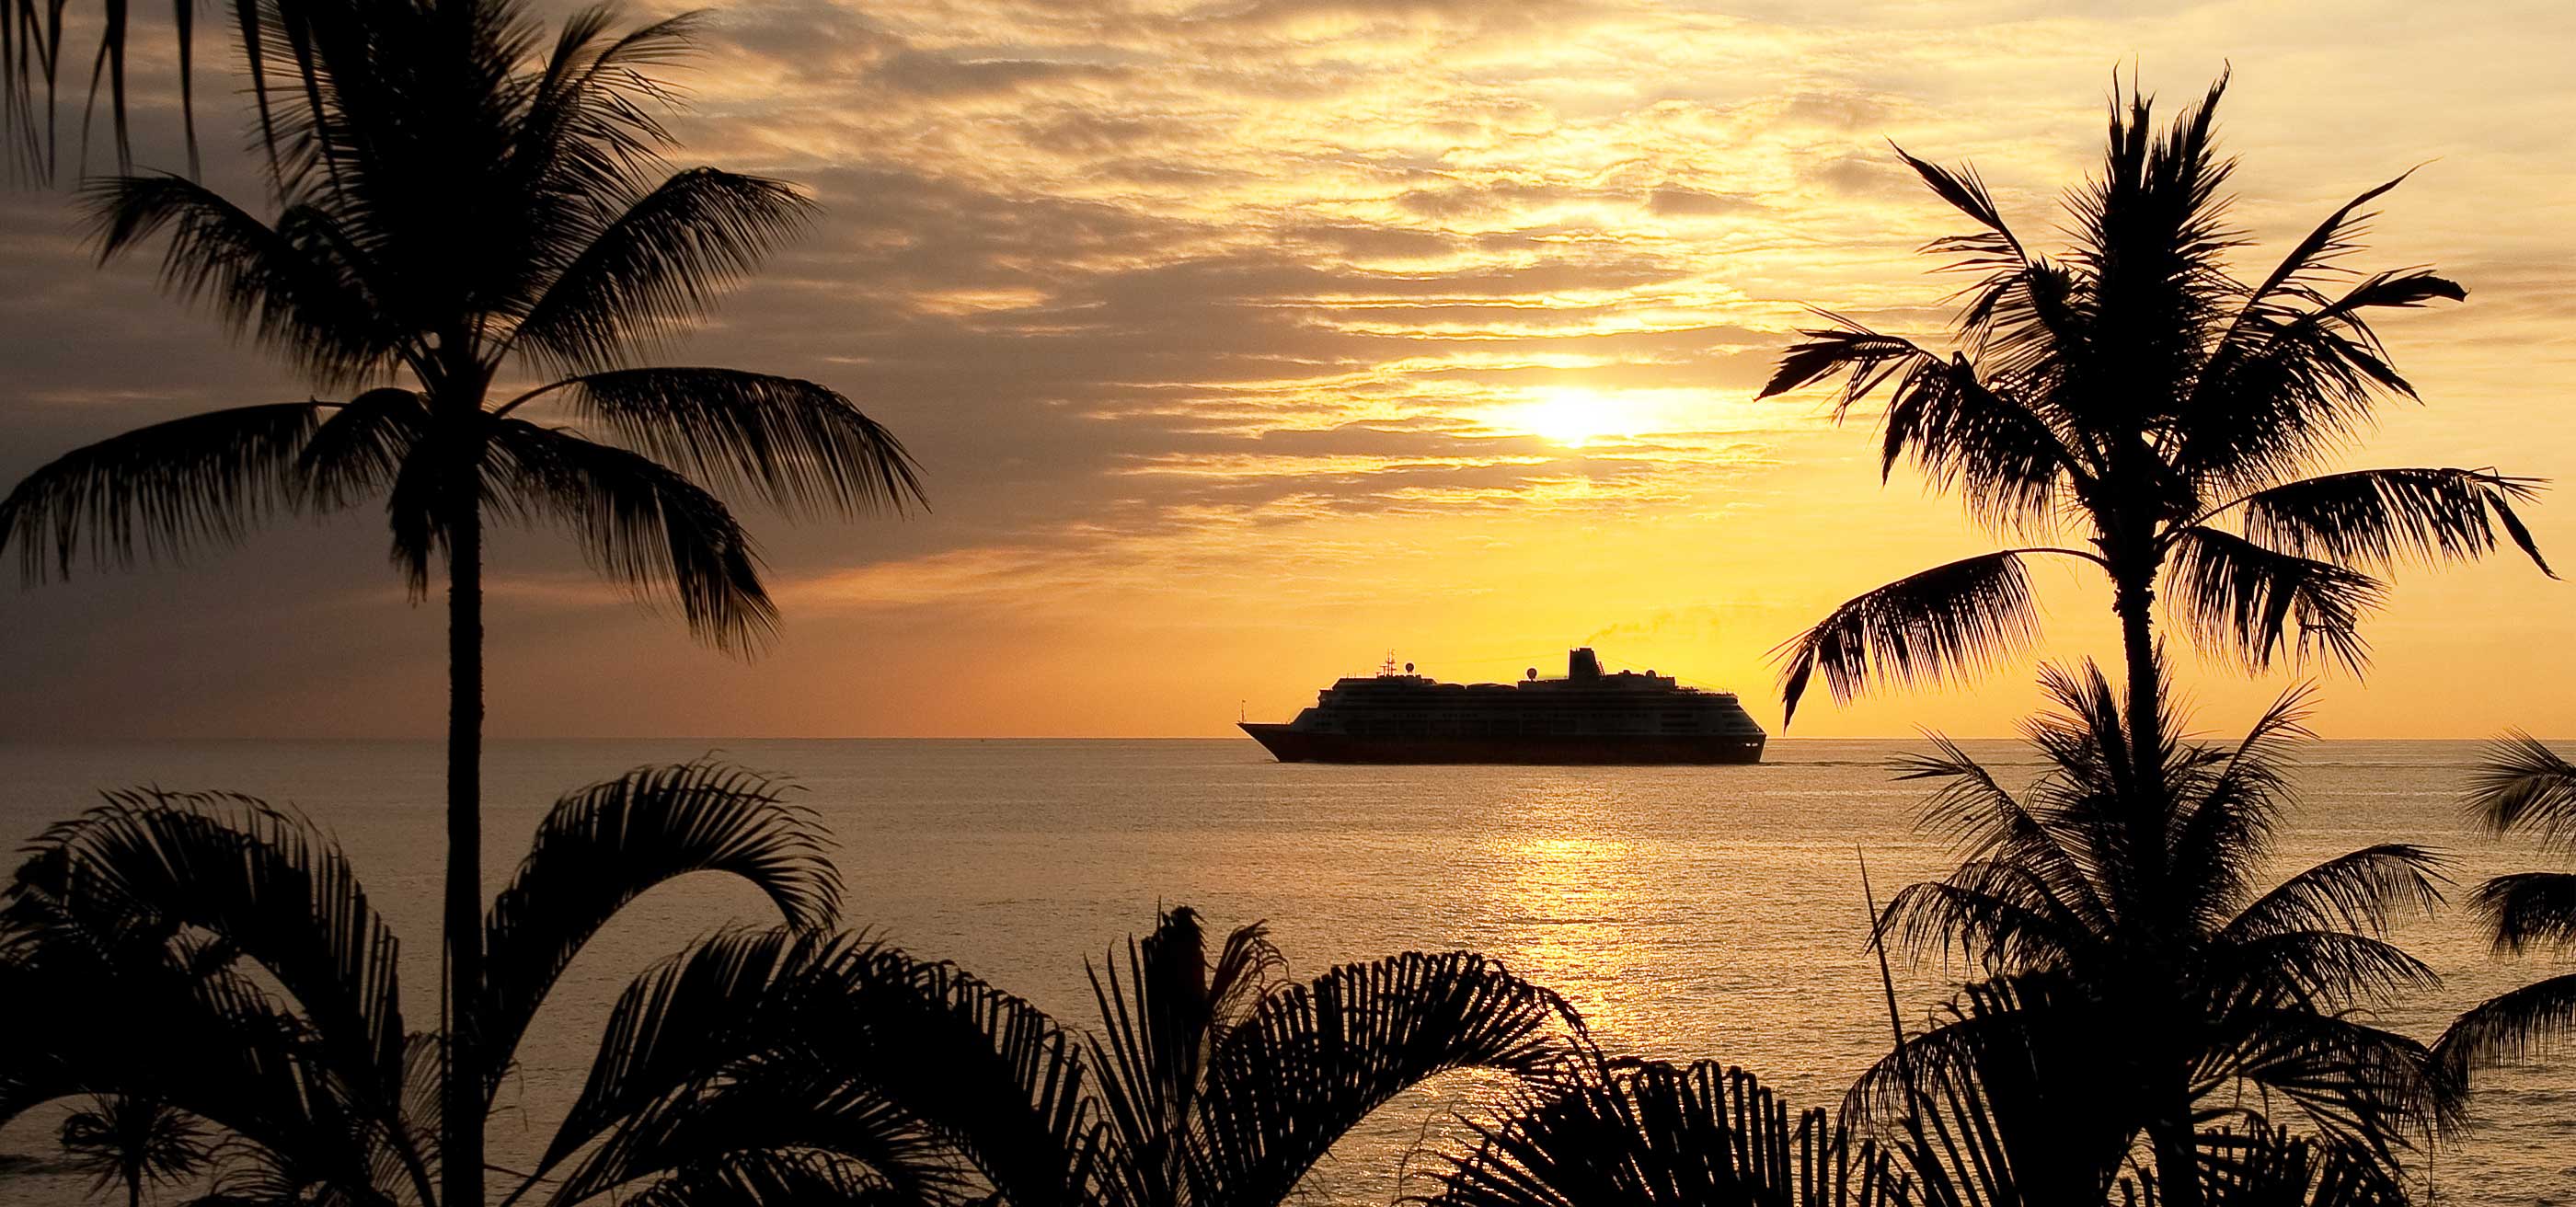 Starboard Cruise Services - Starboard will be recognized as the world-class  travel and leisure retailer.